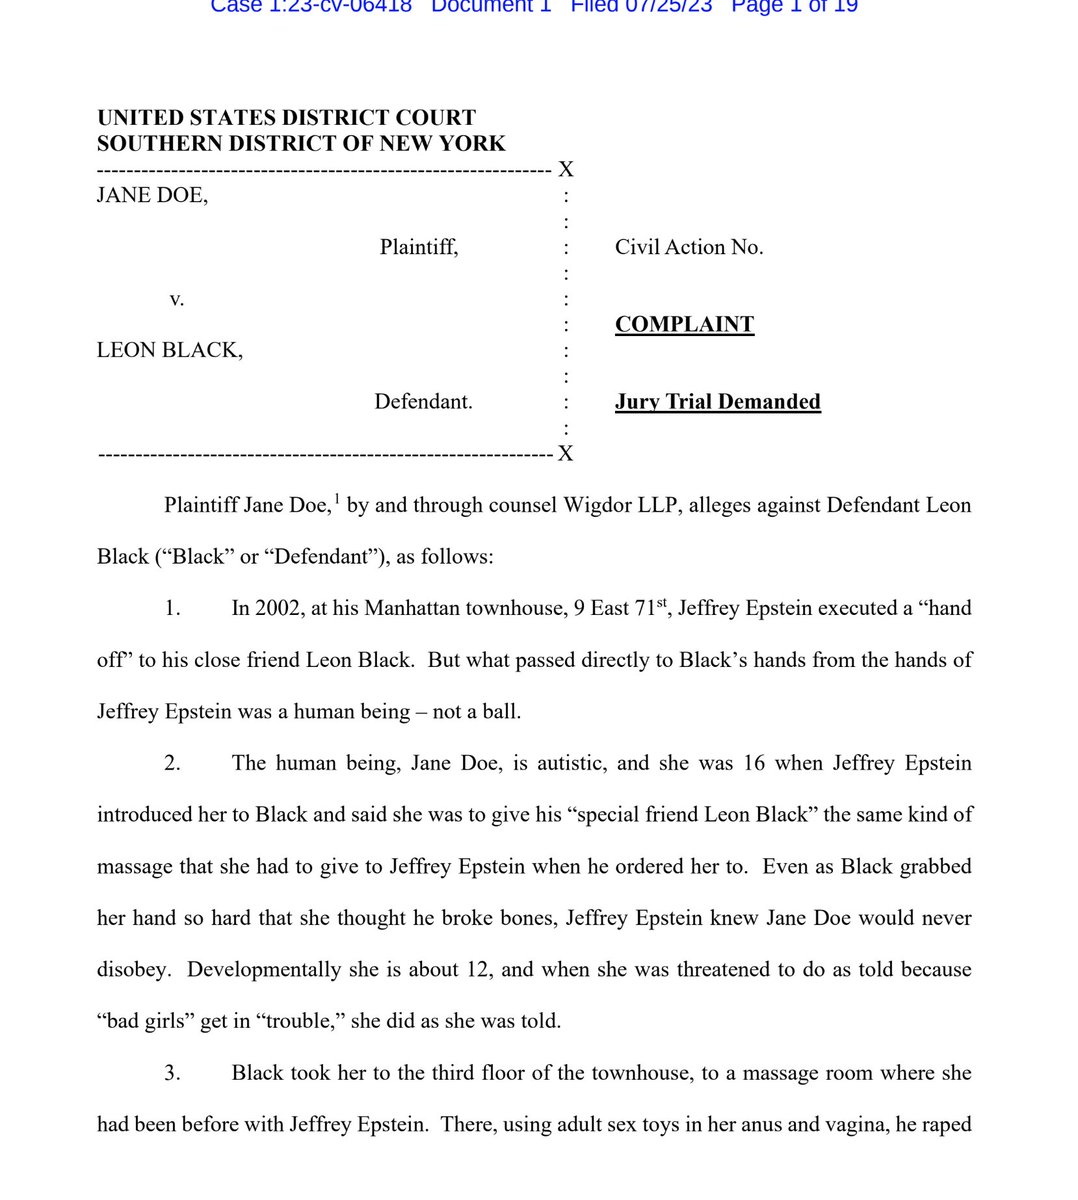 BREAKING: (warning: explicit content) Woman files lawsuit against Leon Black, alleging she was trafficked to him by Epstein and Maxwell when she was 16. The woman, who has Autism and a form of Down Syndrome, says she was severely beaten and raped by the former CEO. (more)